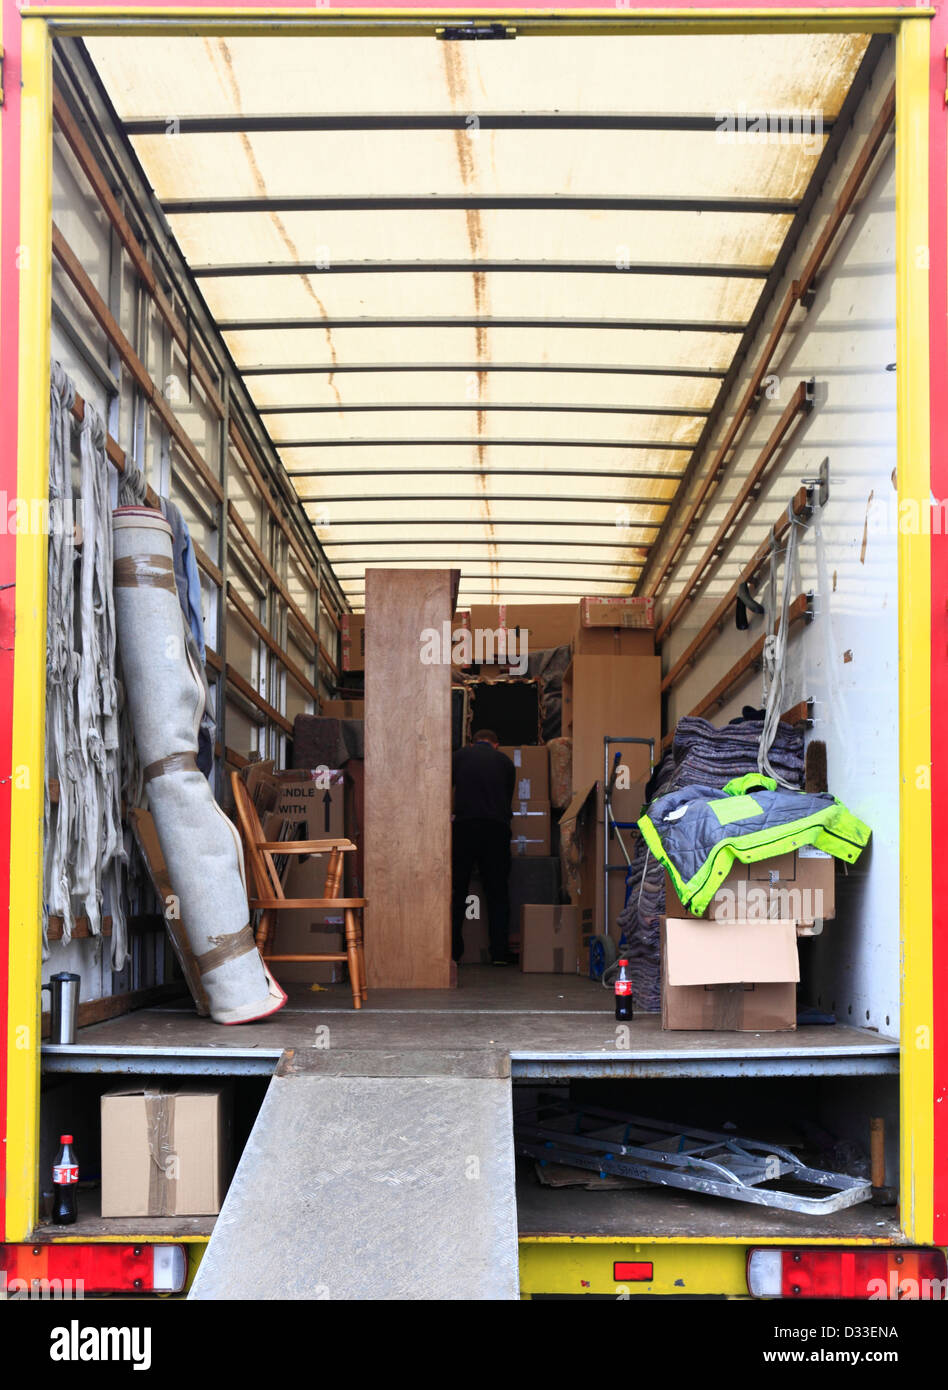 Looking into the back of a removal van part way through being filled for a house move. Stock Photo